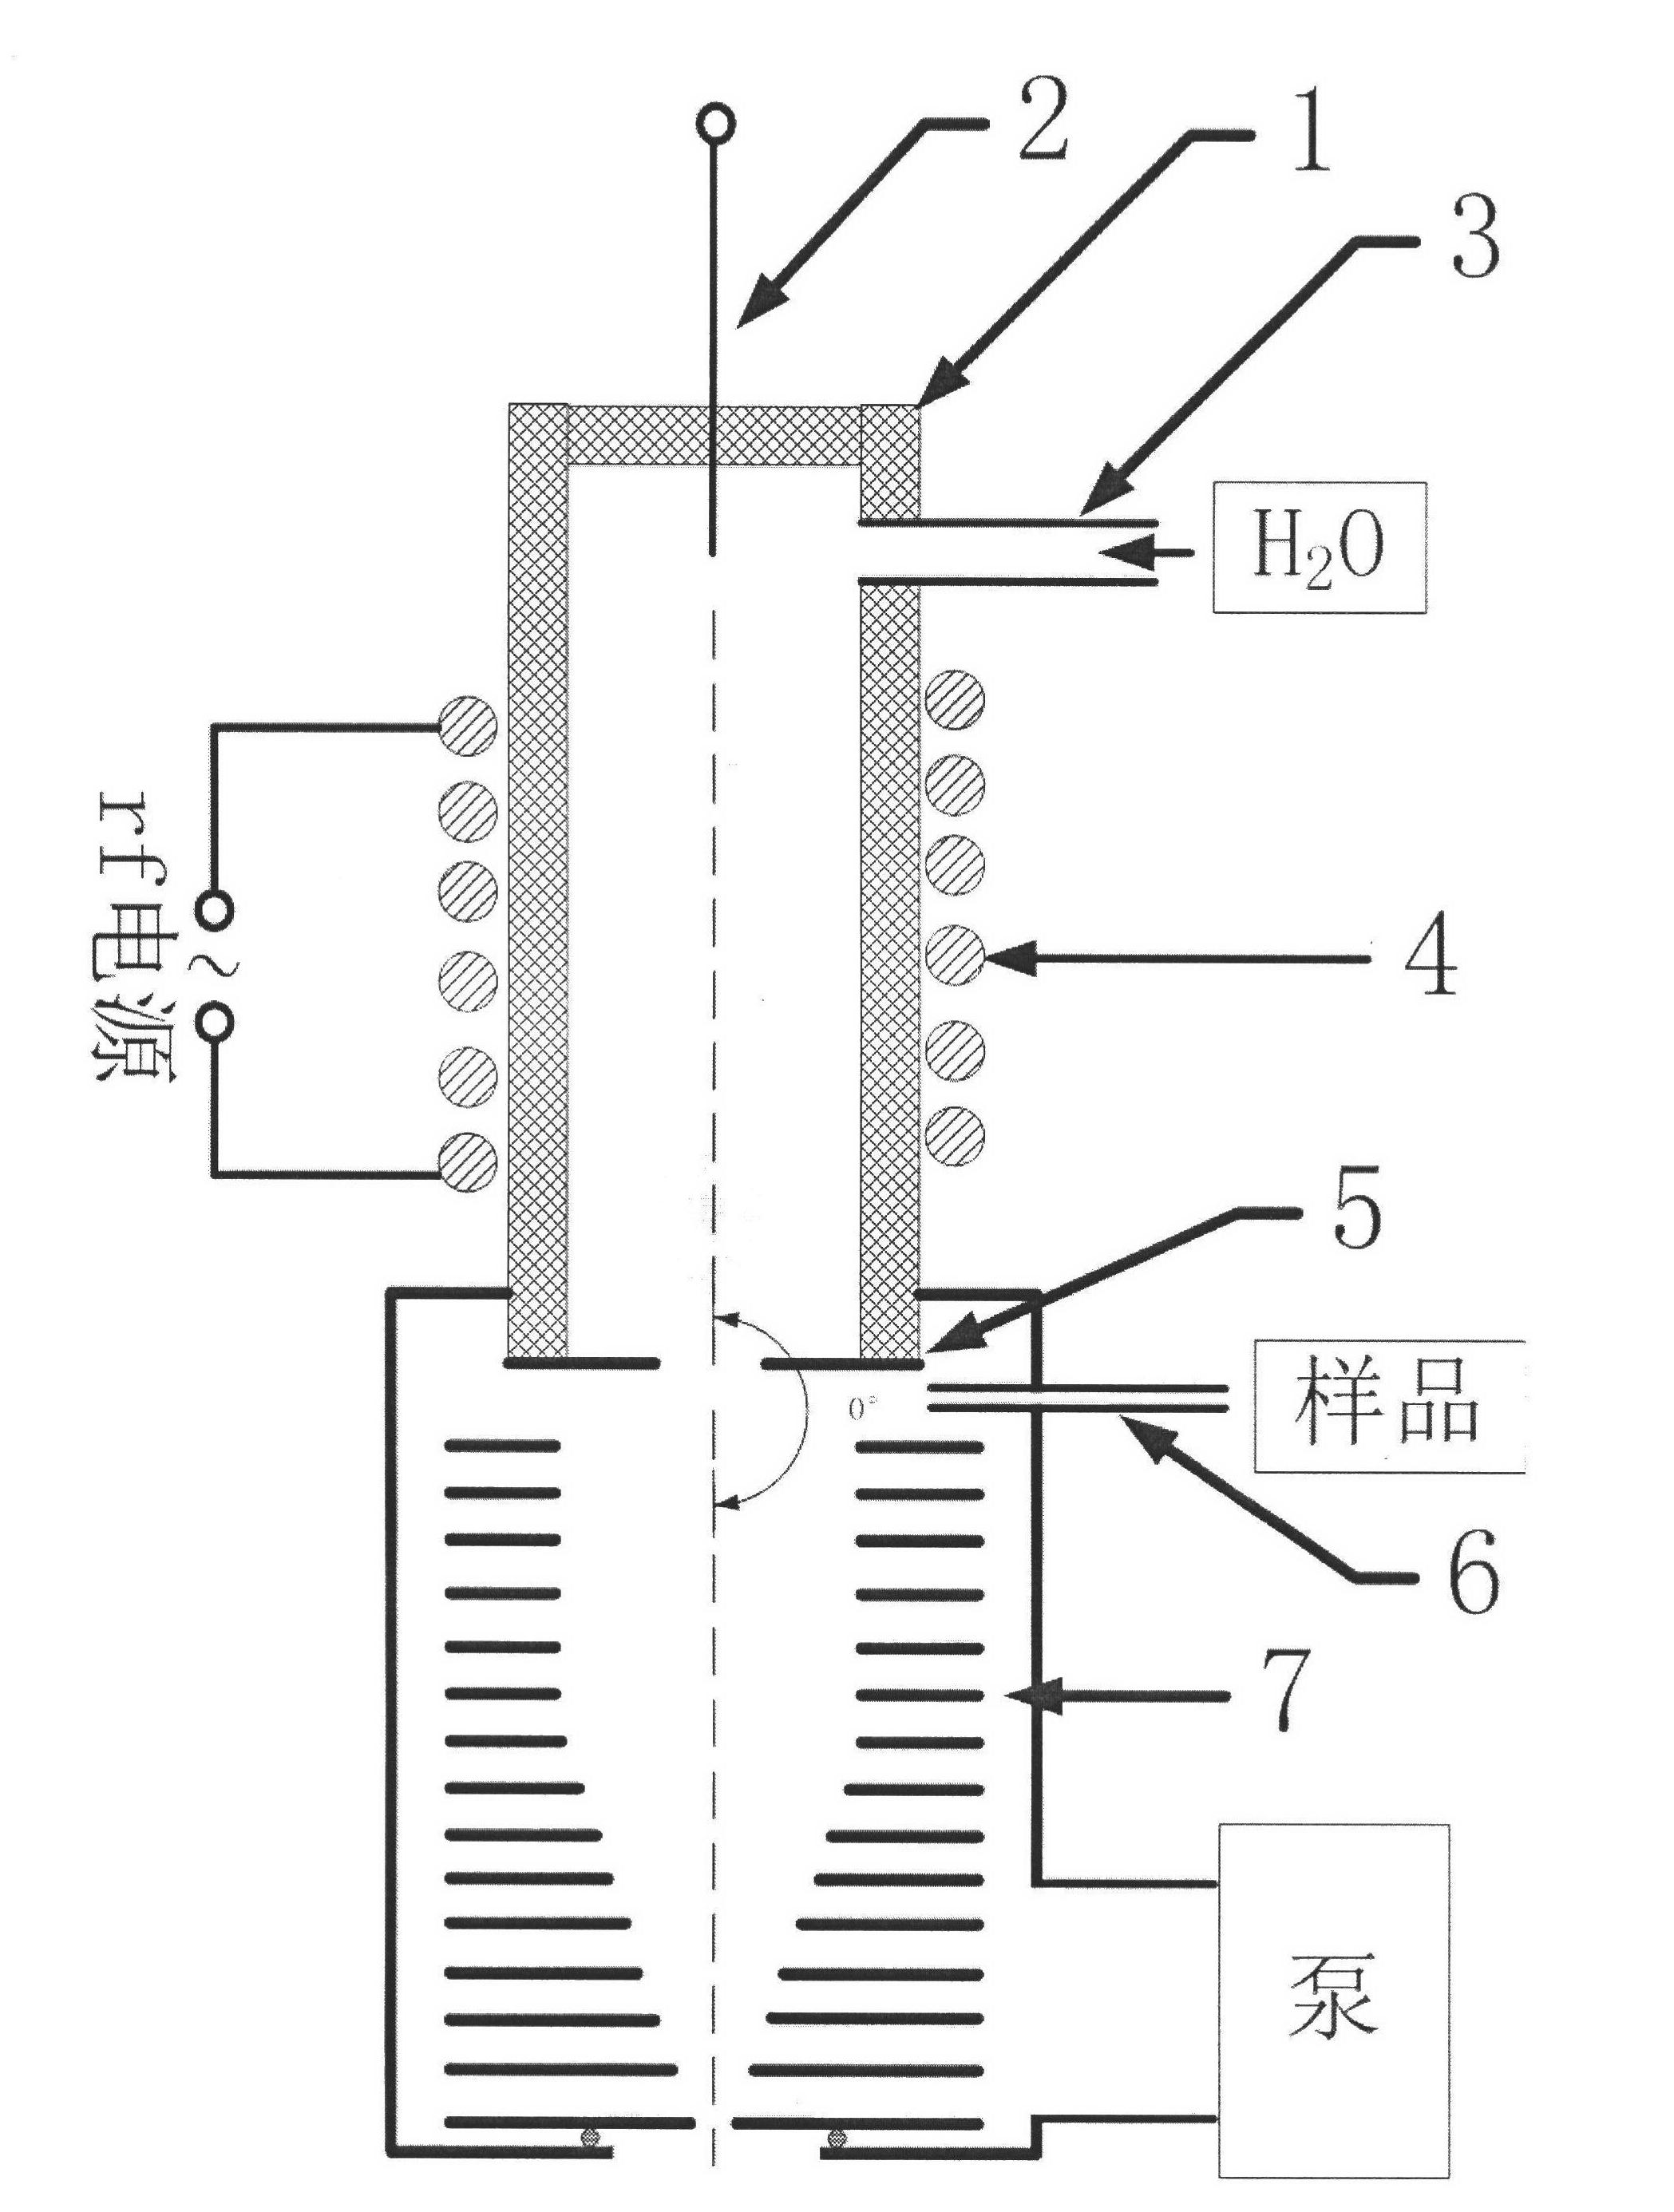 Ion source of proton transfer mass spectrometer